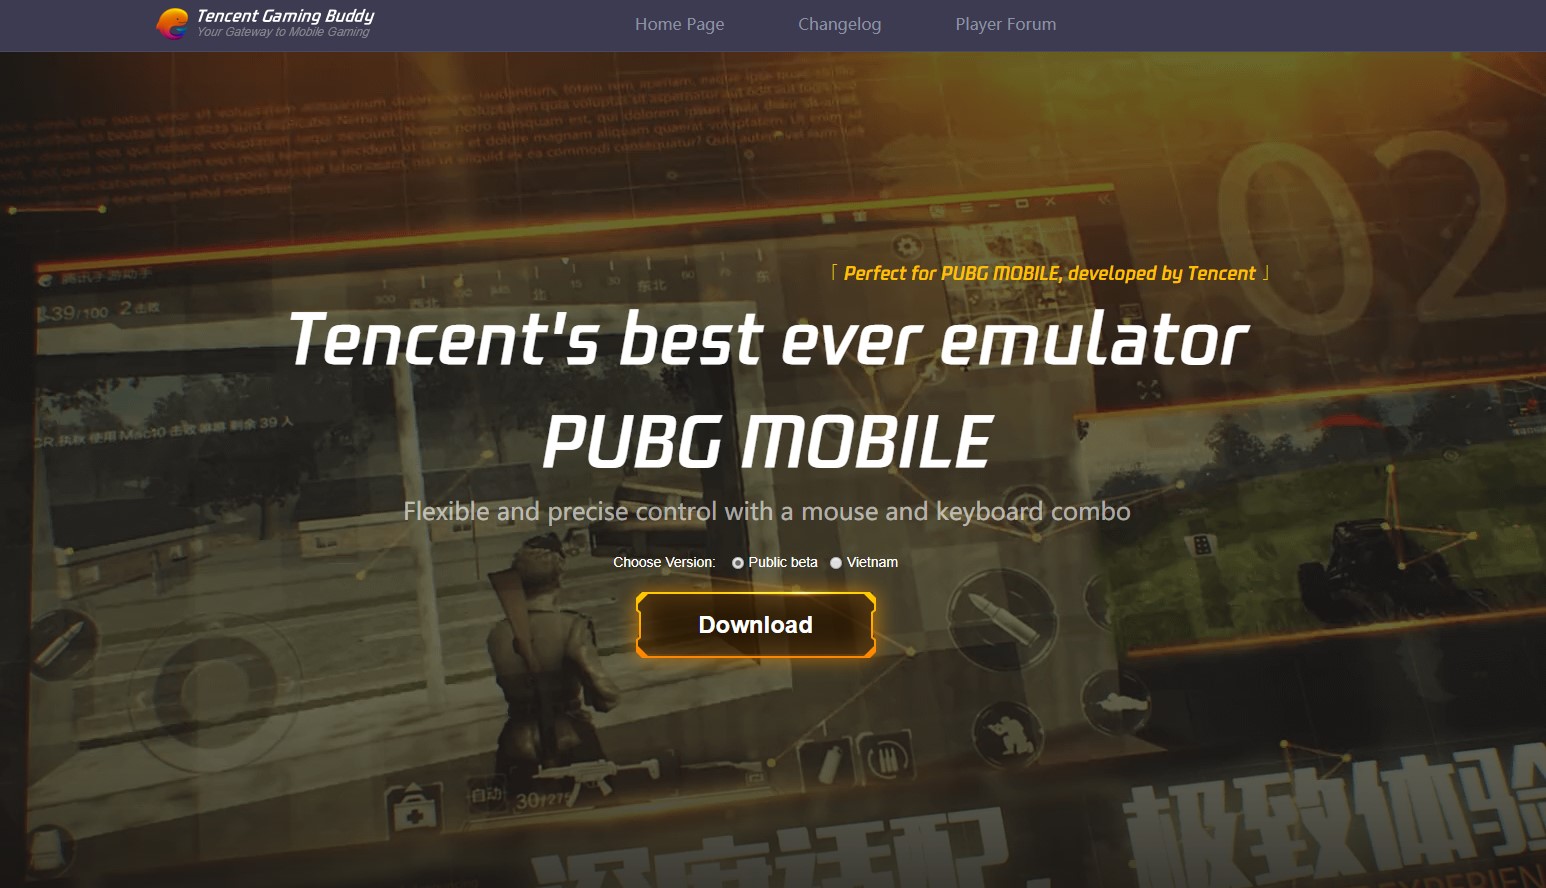 Tencent gaming buddy tencent best emulator for pubg mobile фото 31